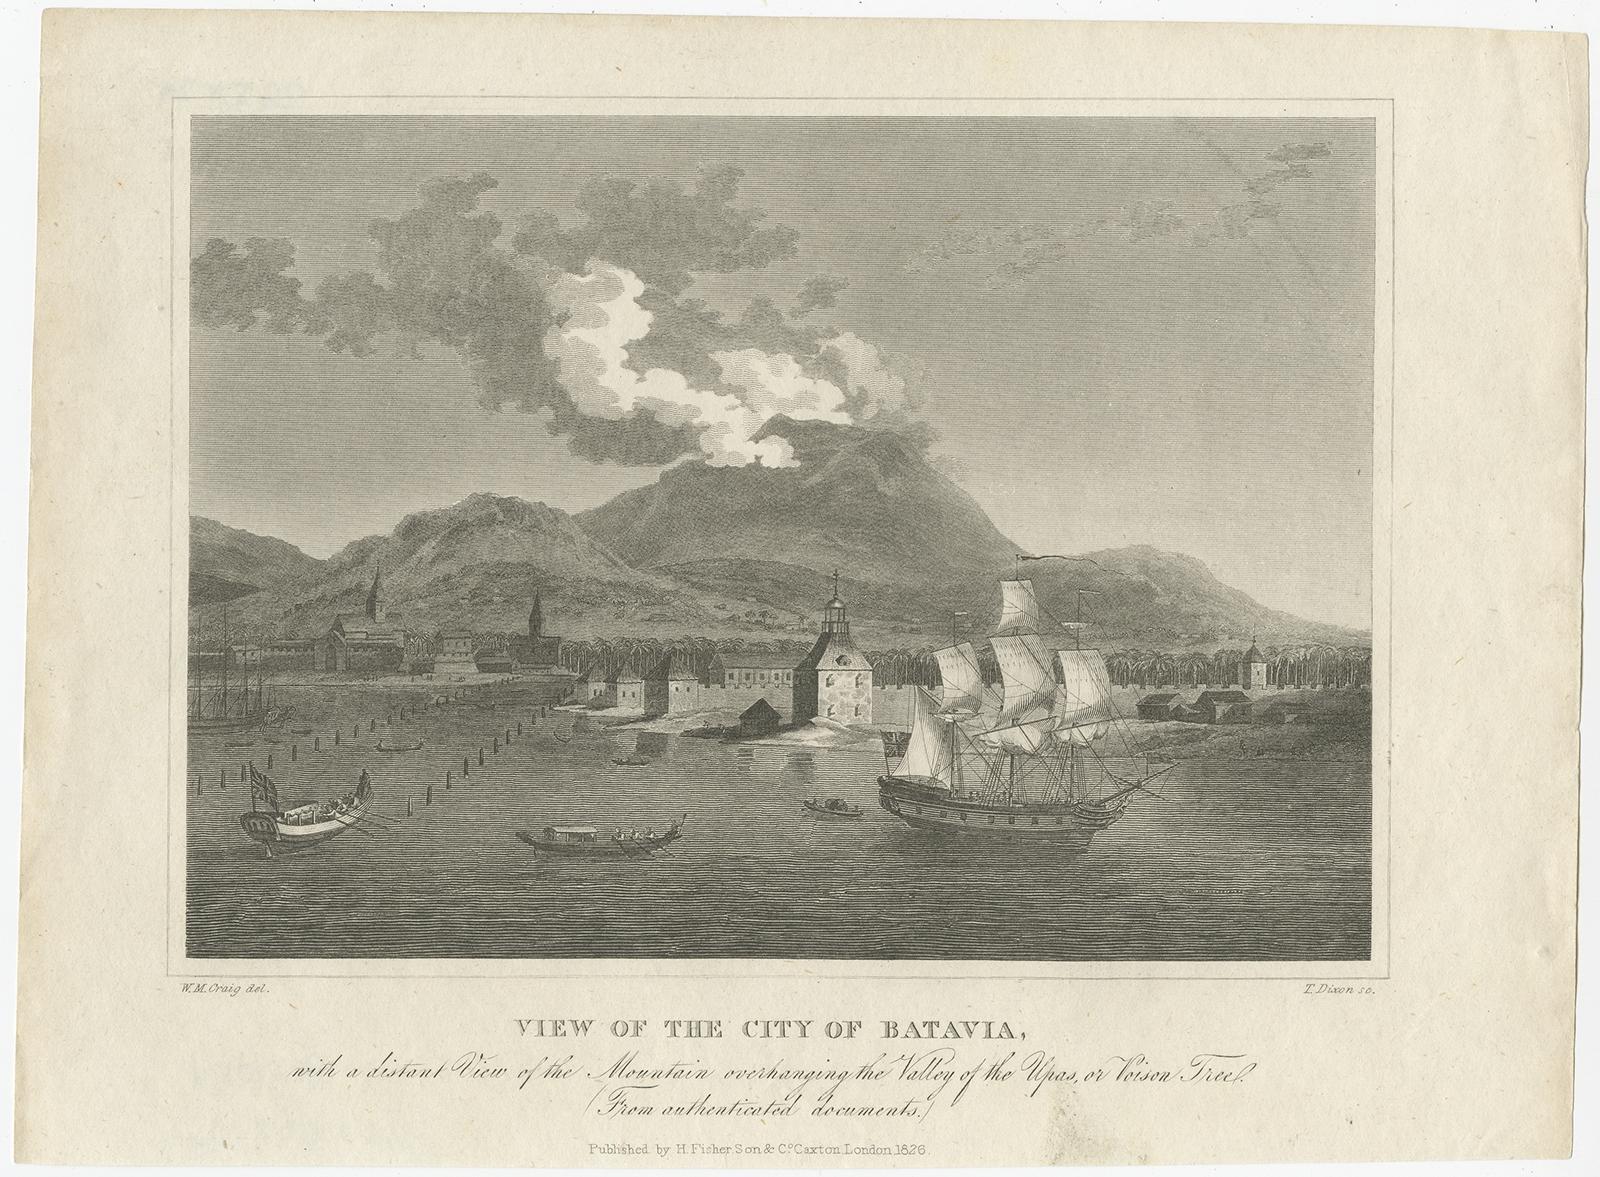 Description: Antique print titled 'View of the City of Batavia'. Old print with a view of the city of Batavia (Jakarta), Indonesia. 

In the background Genung Salak or Salak Mountain, near Buitenzorg or nowadays Bogor. In the front a ship with the